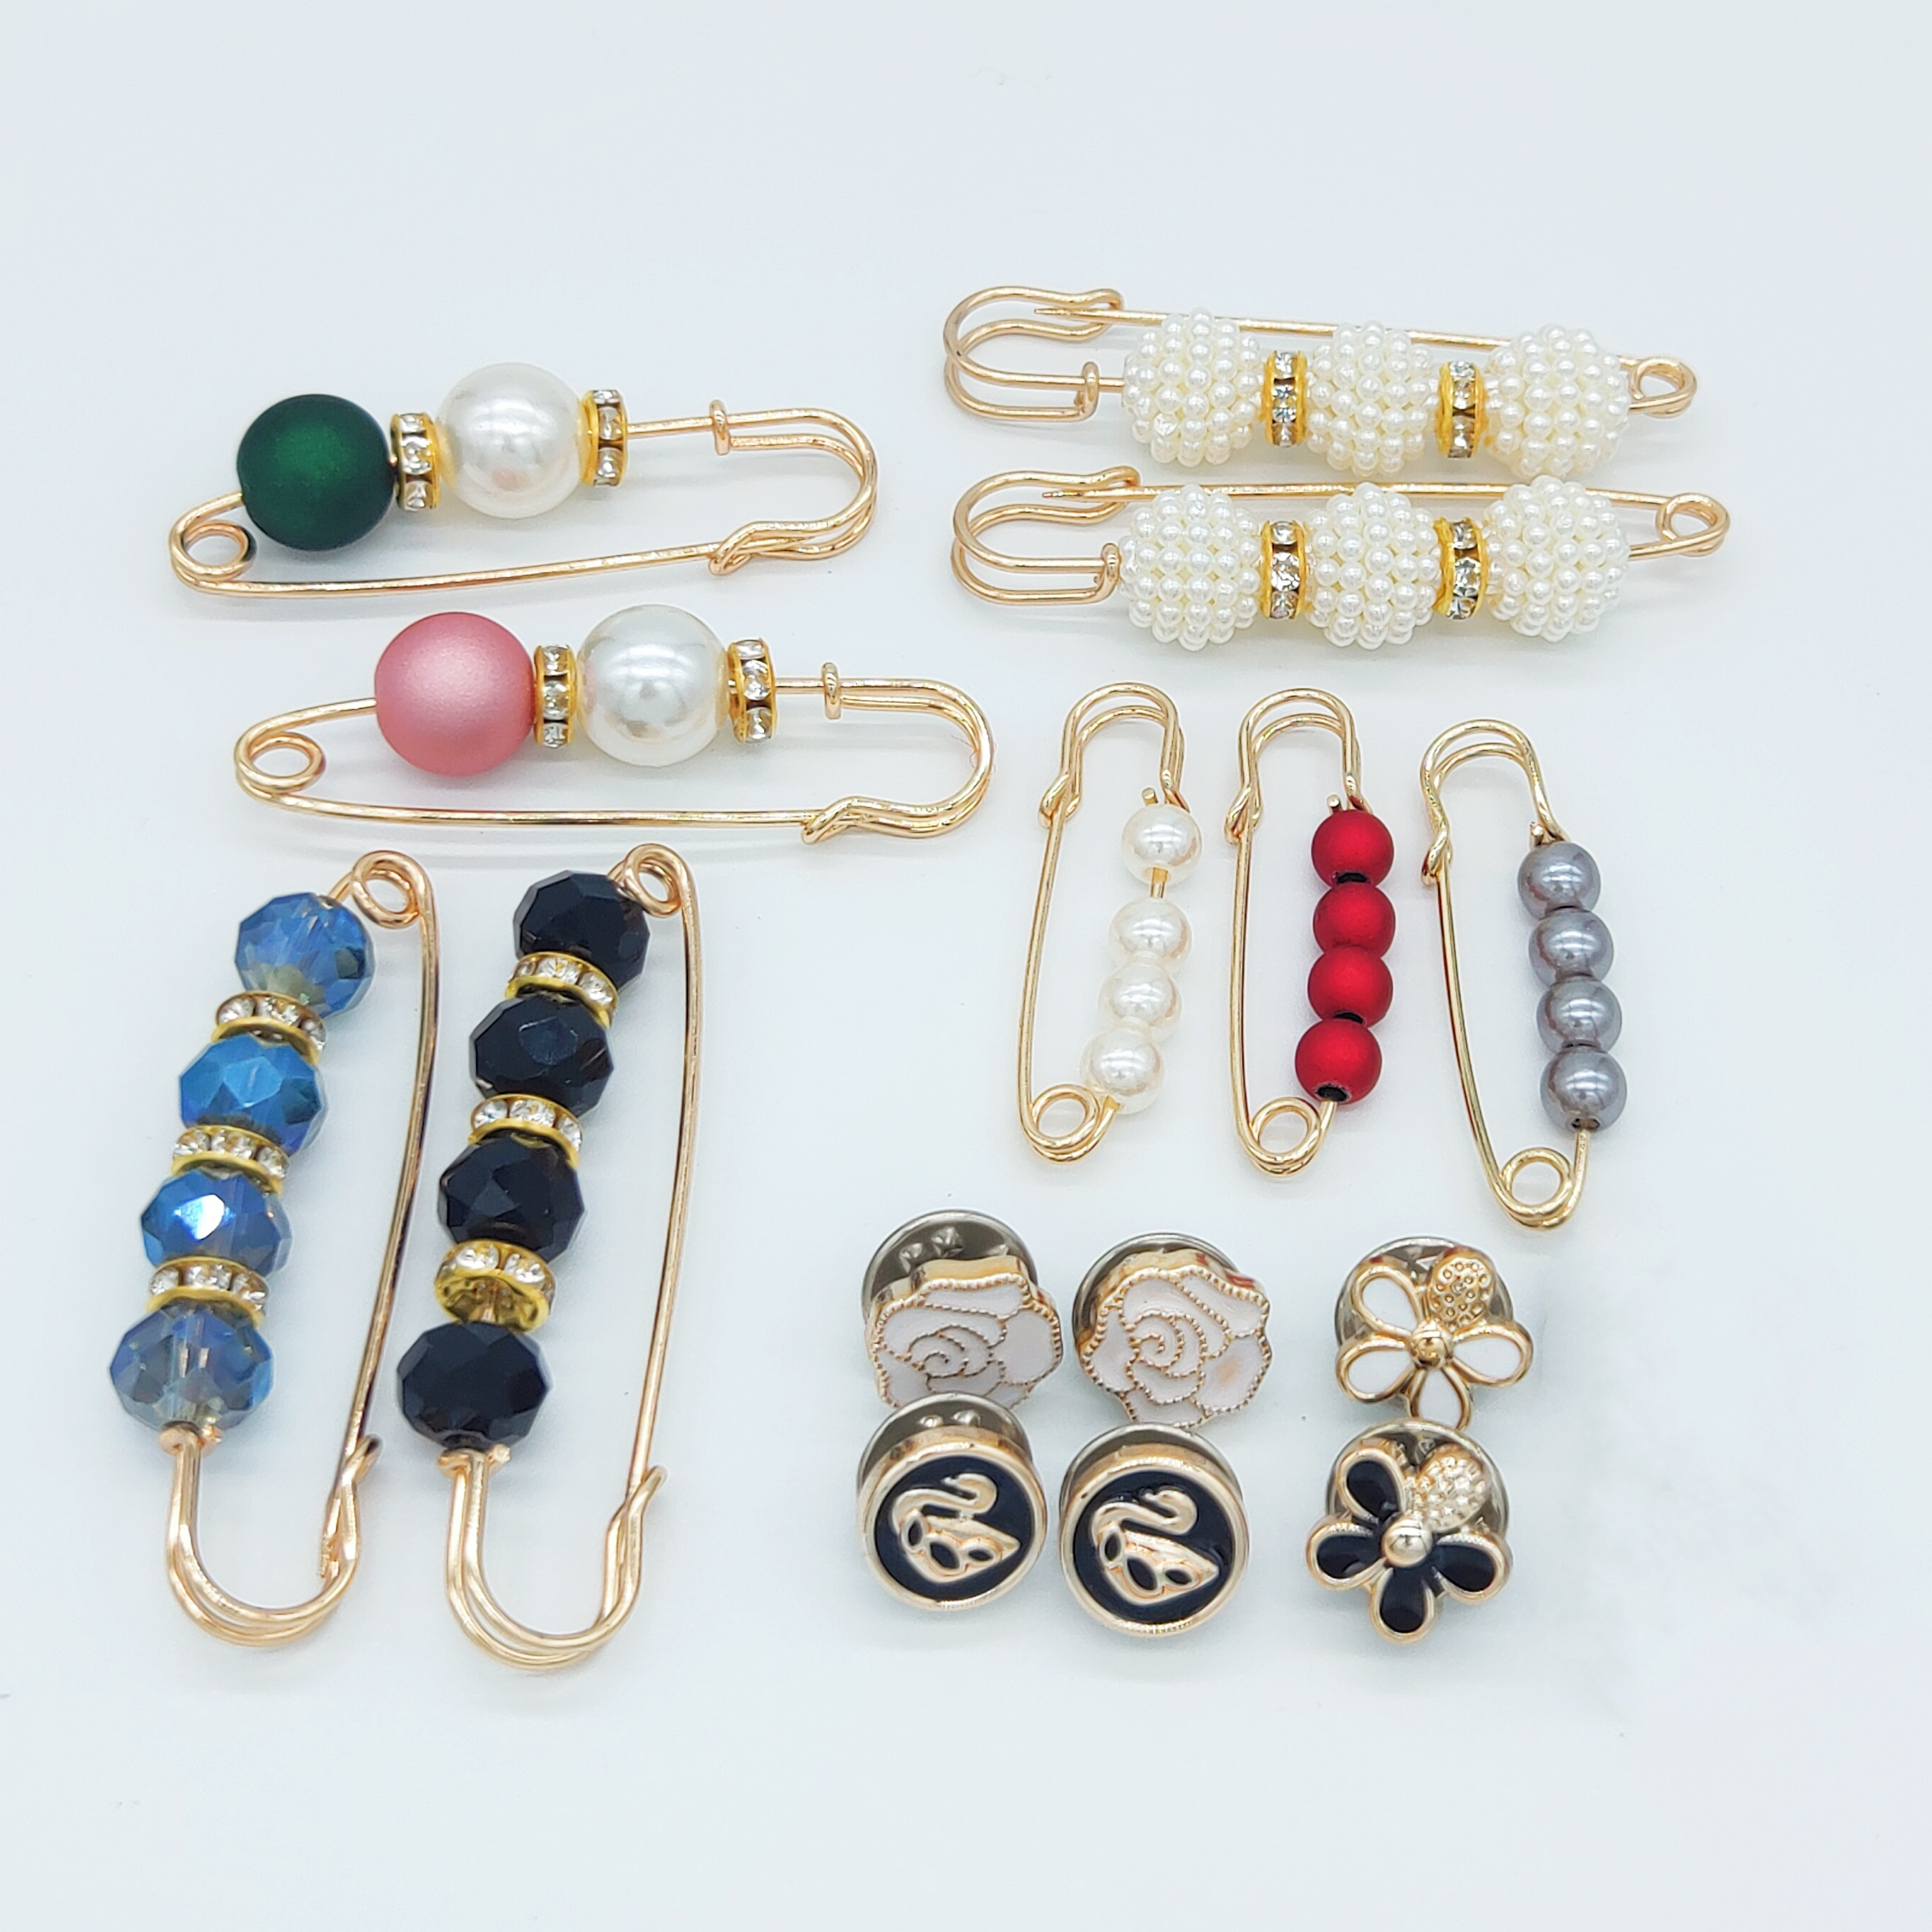 Pin on Fashion Accessories